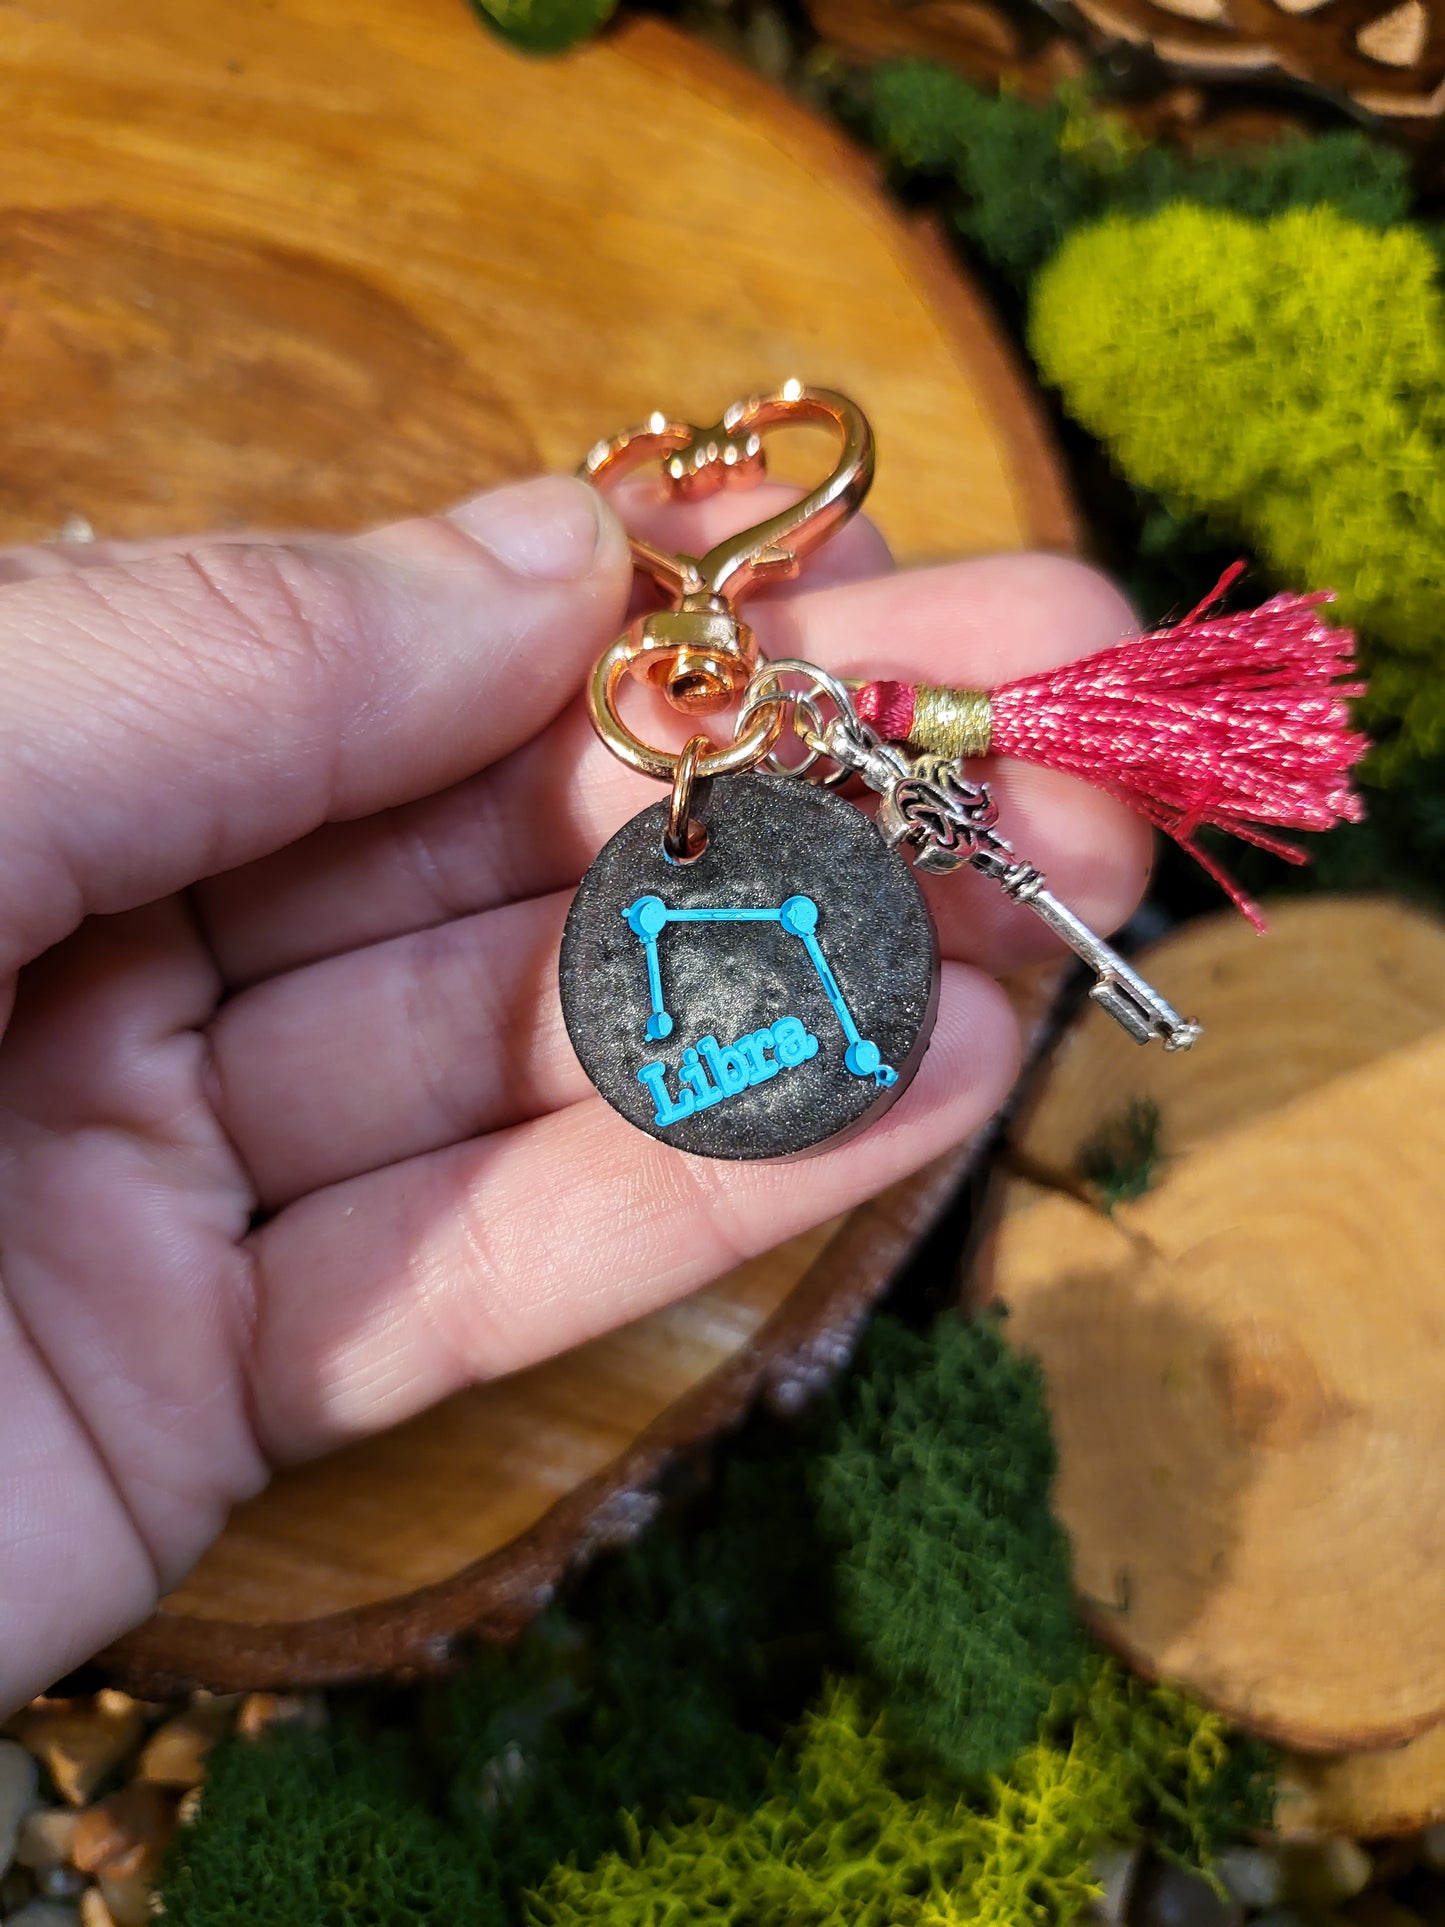 Graphite Gray and Teal Astrological Keychains with Charms